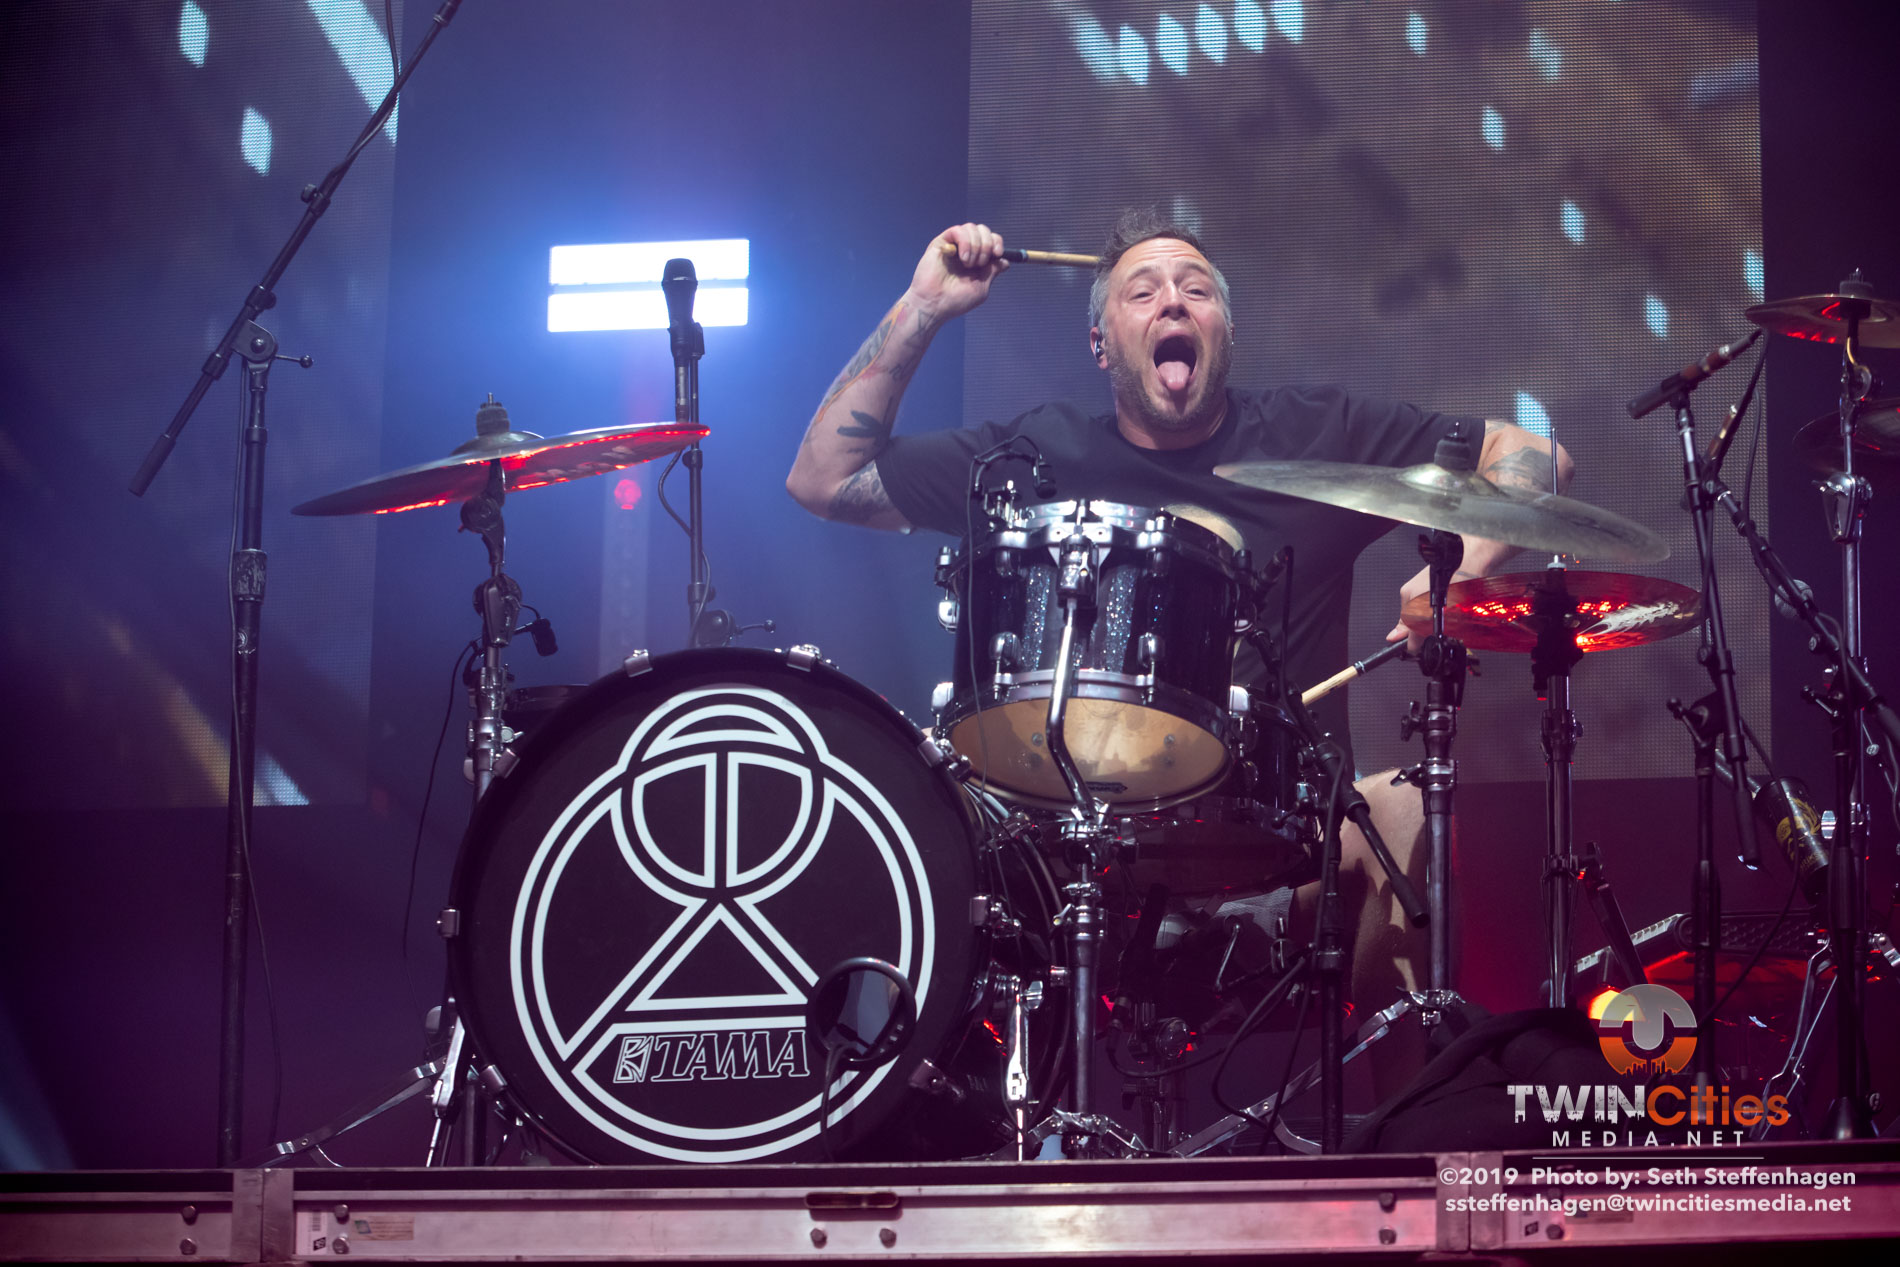 June 15, 2019 - Minneapolis, Minnesota, United States - Coheed & Cambria live in concert at The Armory along with Mastodon and Every Time I Die.(Photo by Seth Steffenhagen/Steffenhagen Photography)